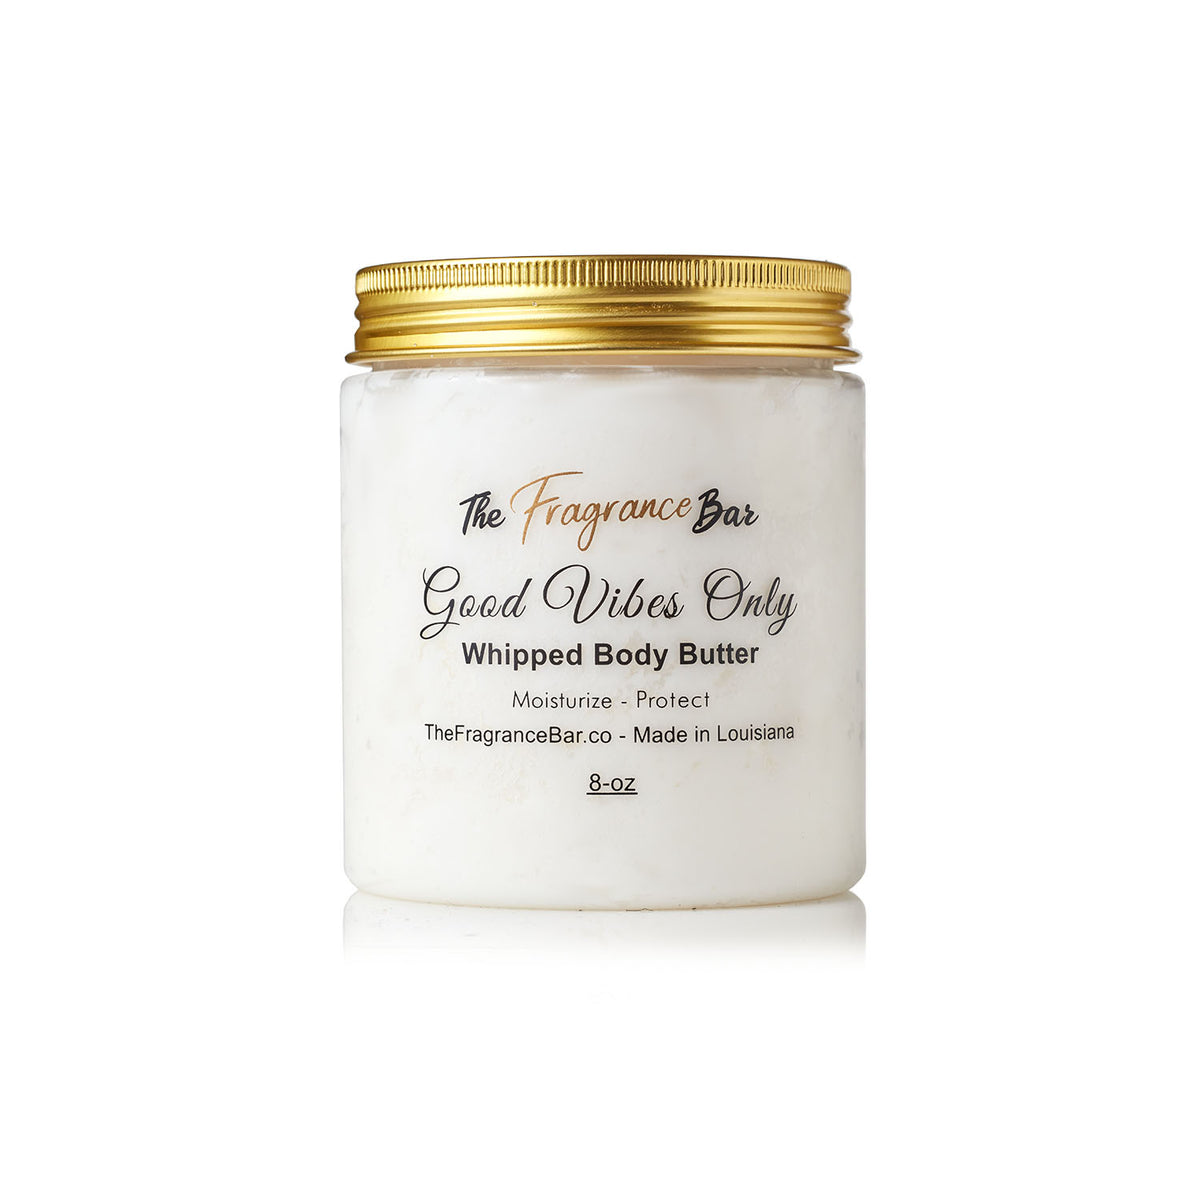 Good Vibes Only Body Butter